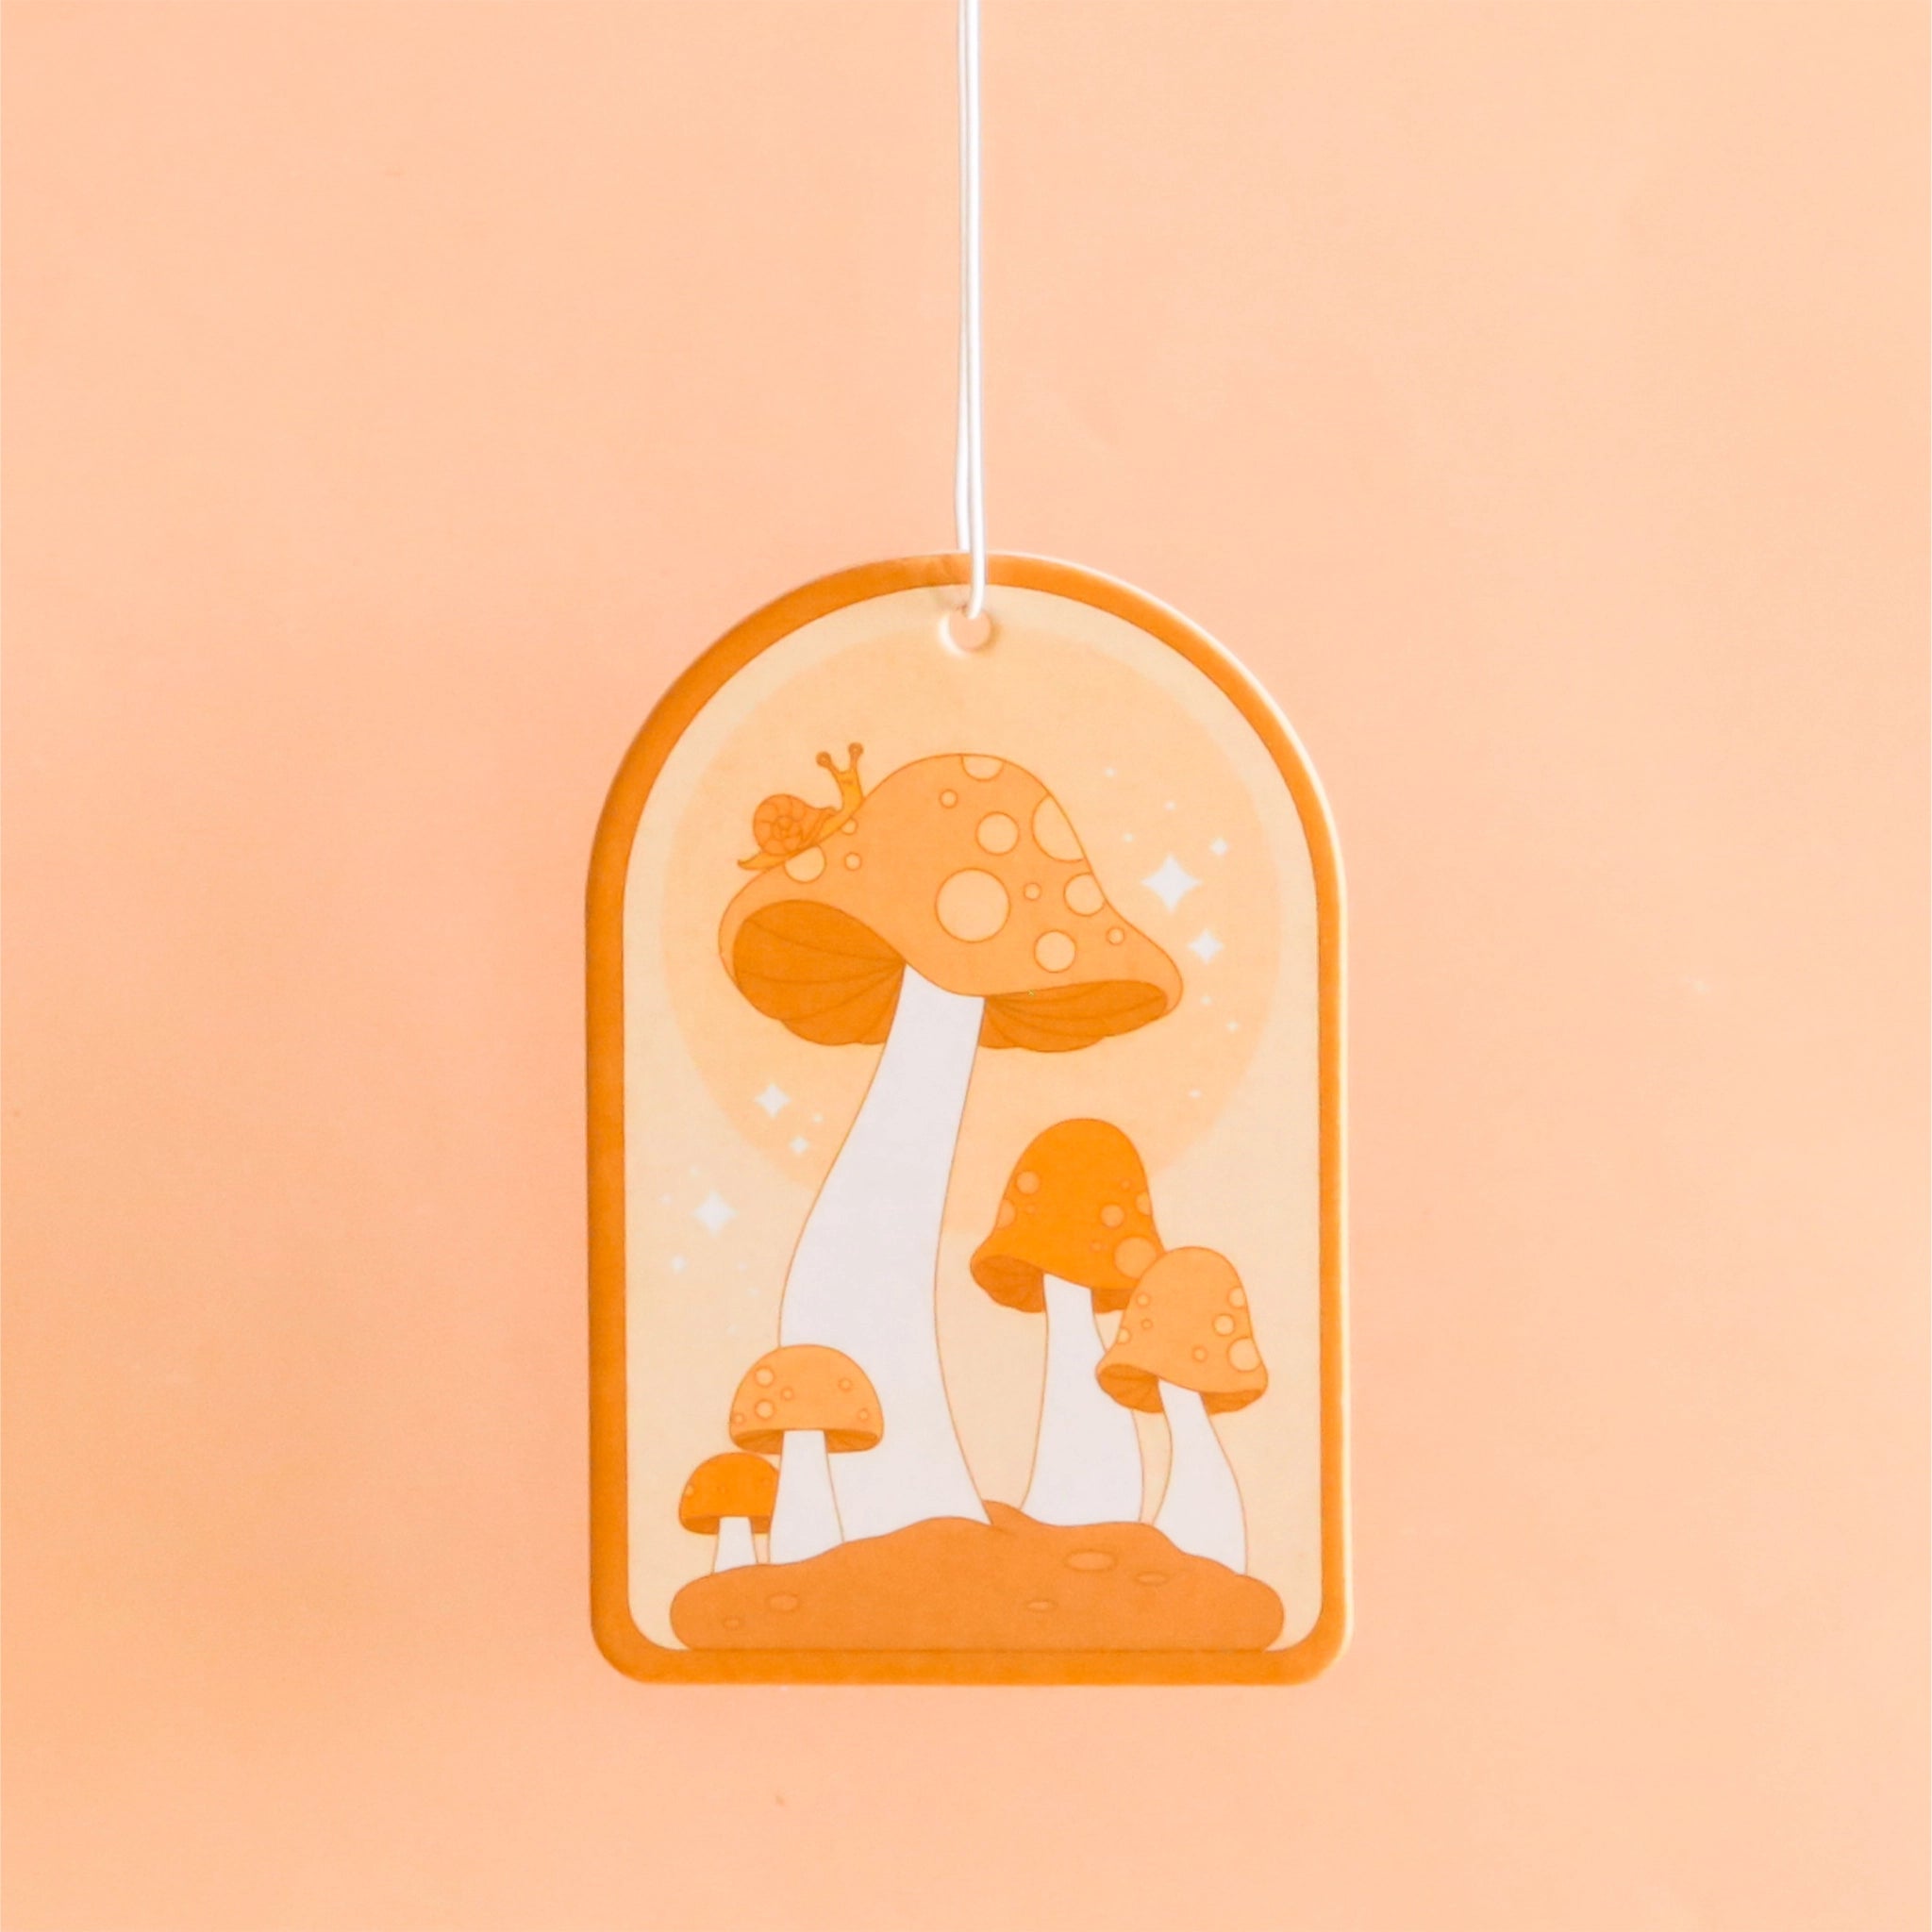 On a light orange background is an arched shaped air freshener with an orange mushroom design and a white elastic loop for hanging.